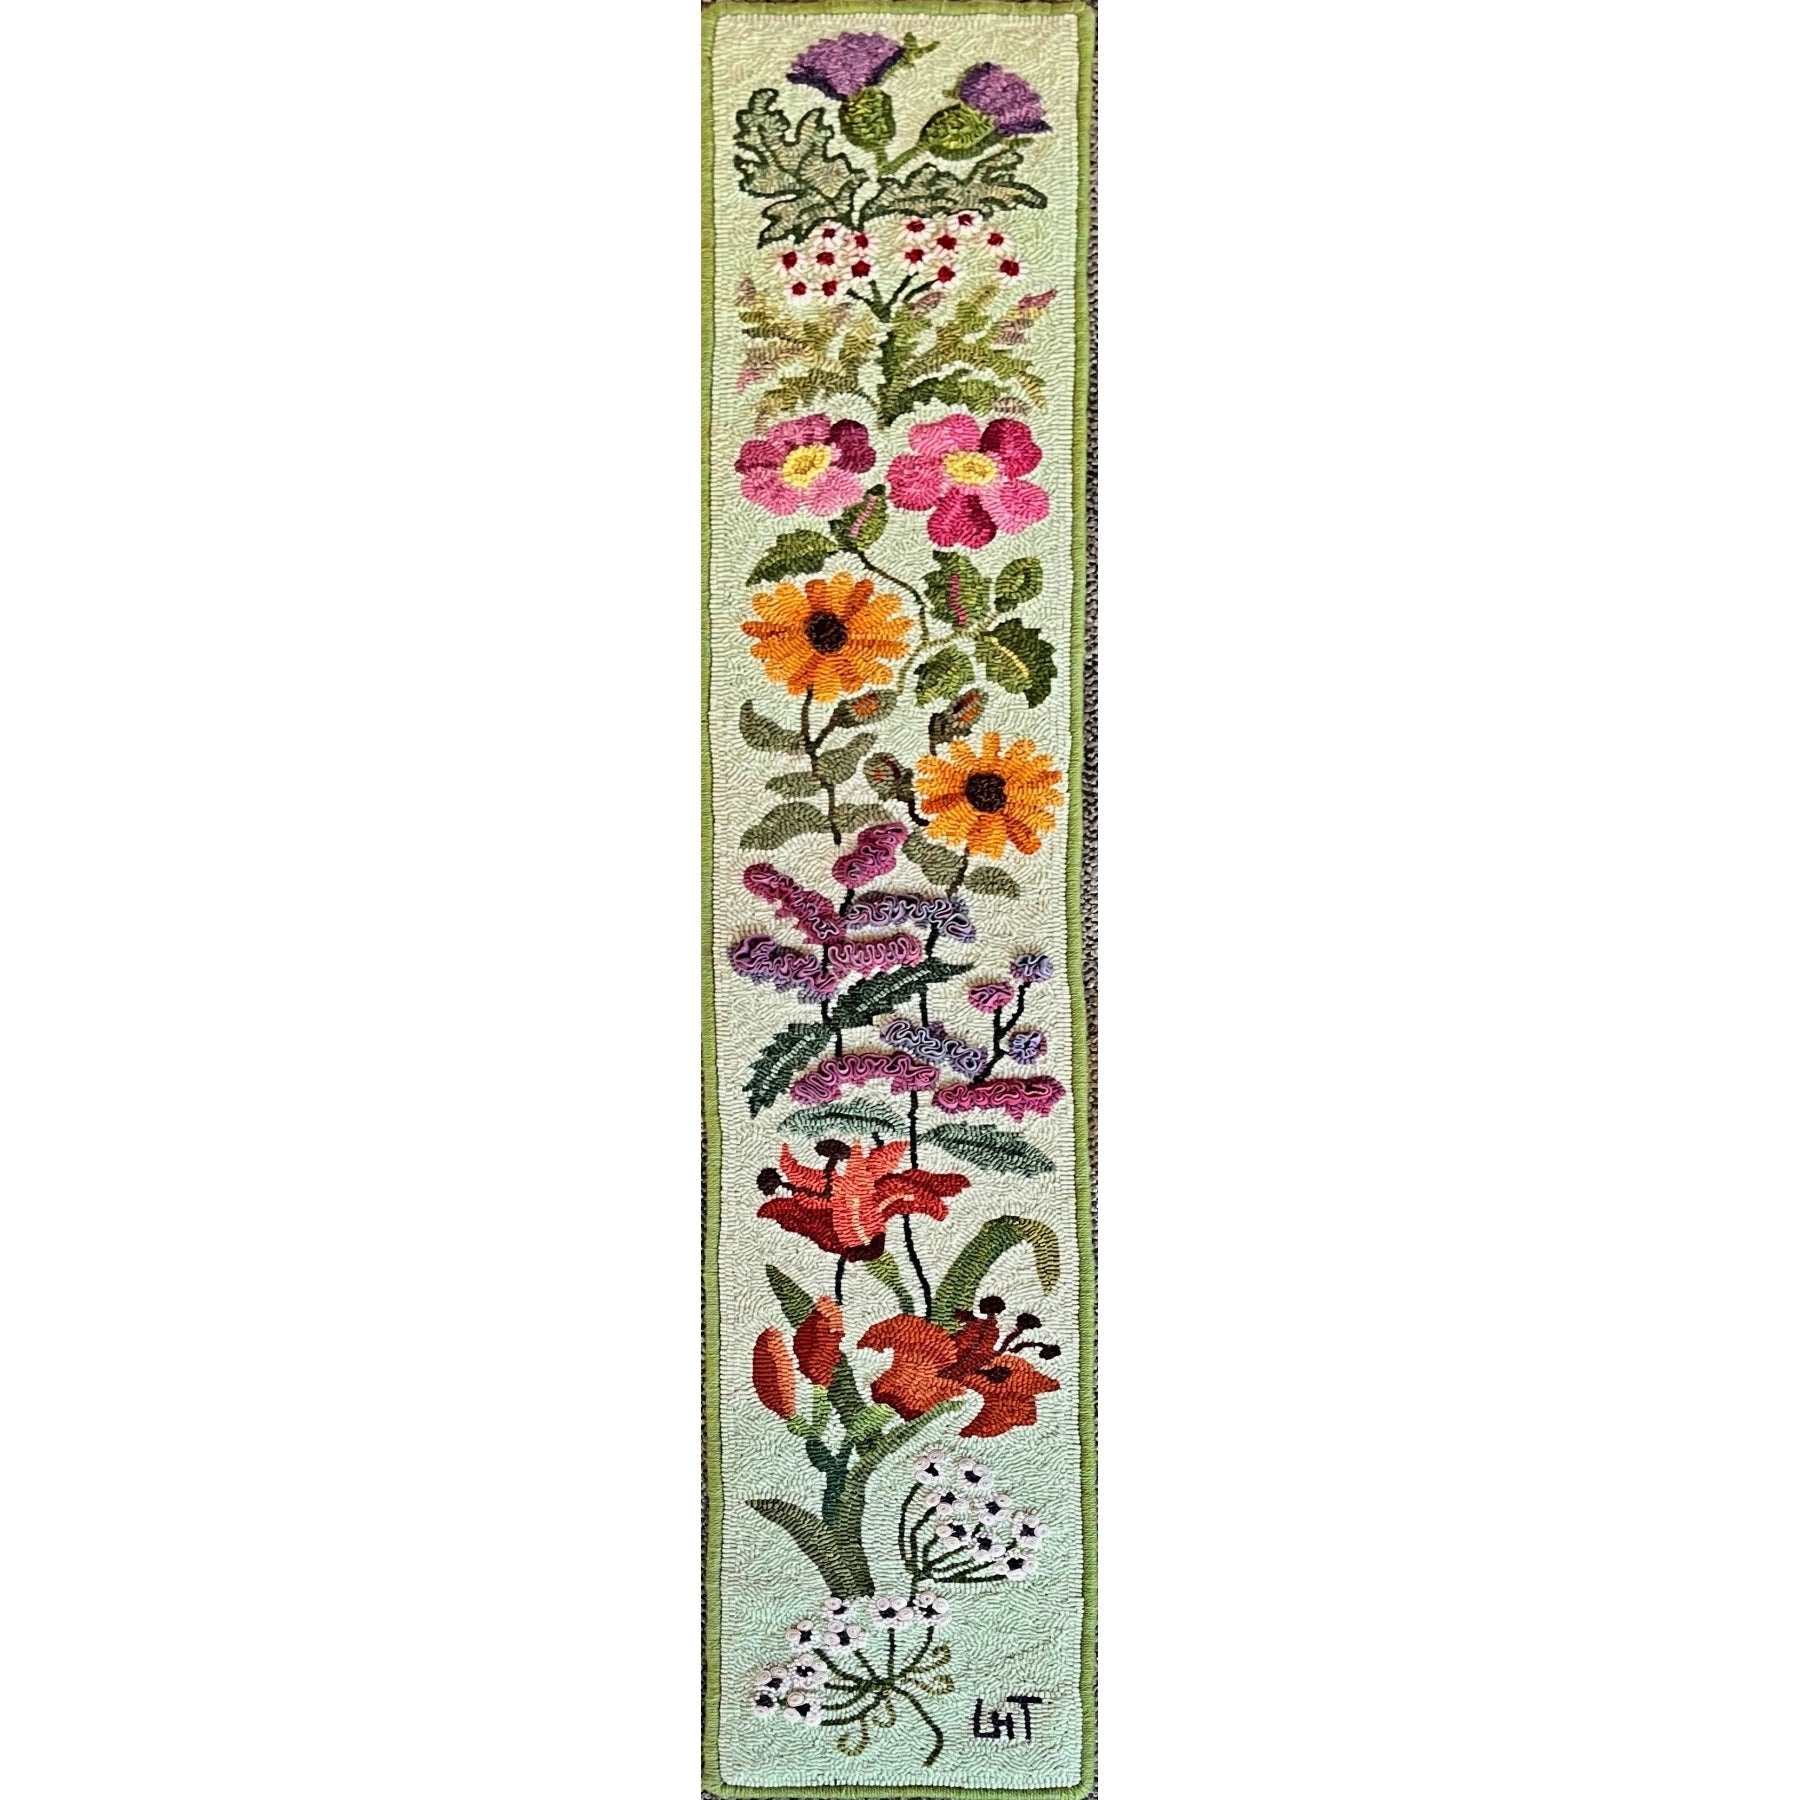 Wildflower Bellpull, rug hooked by Laura Thompson